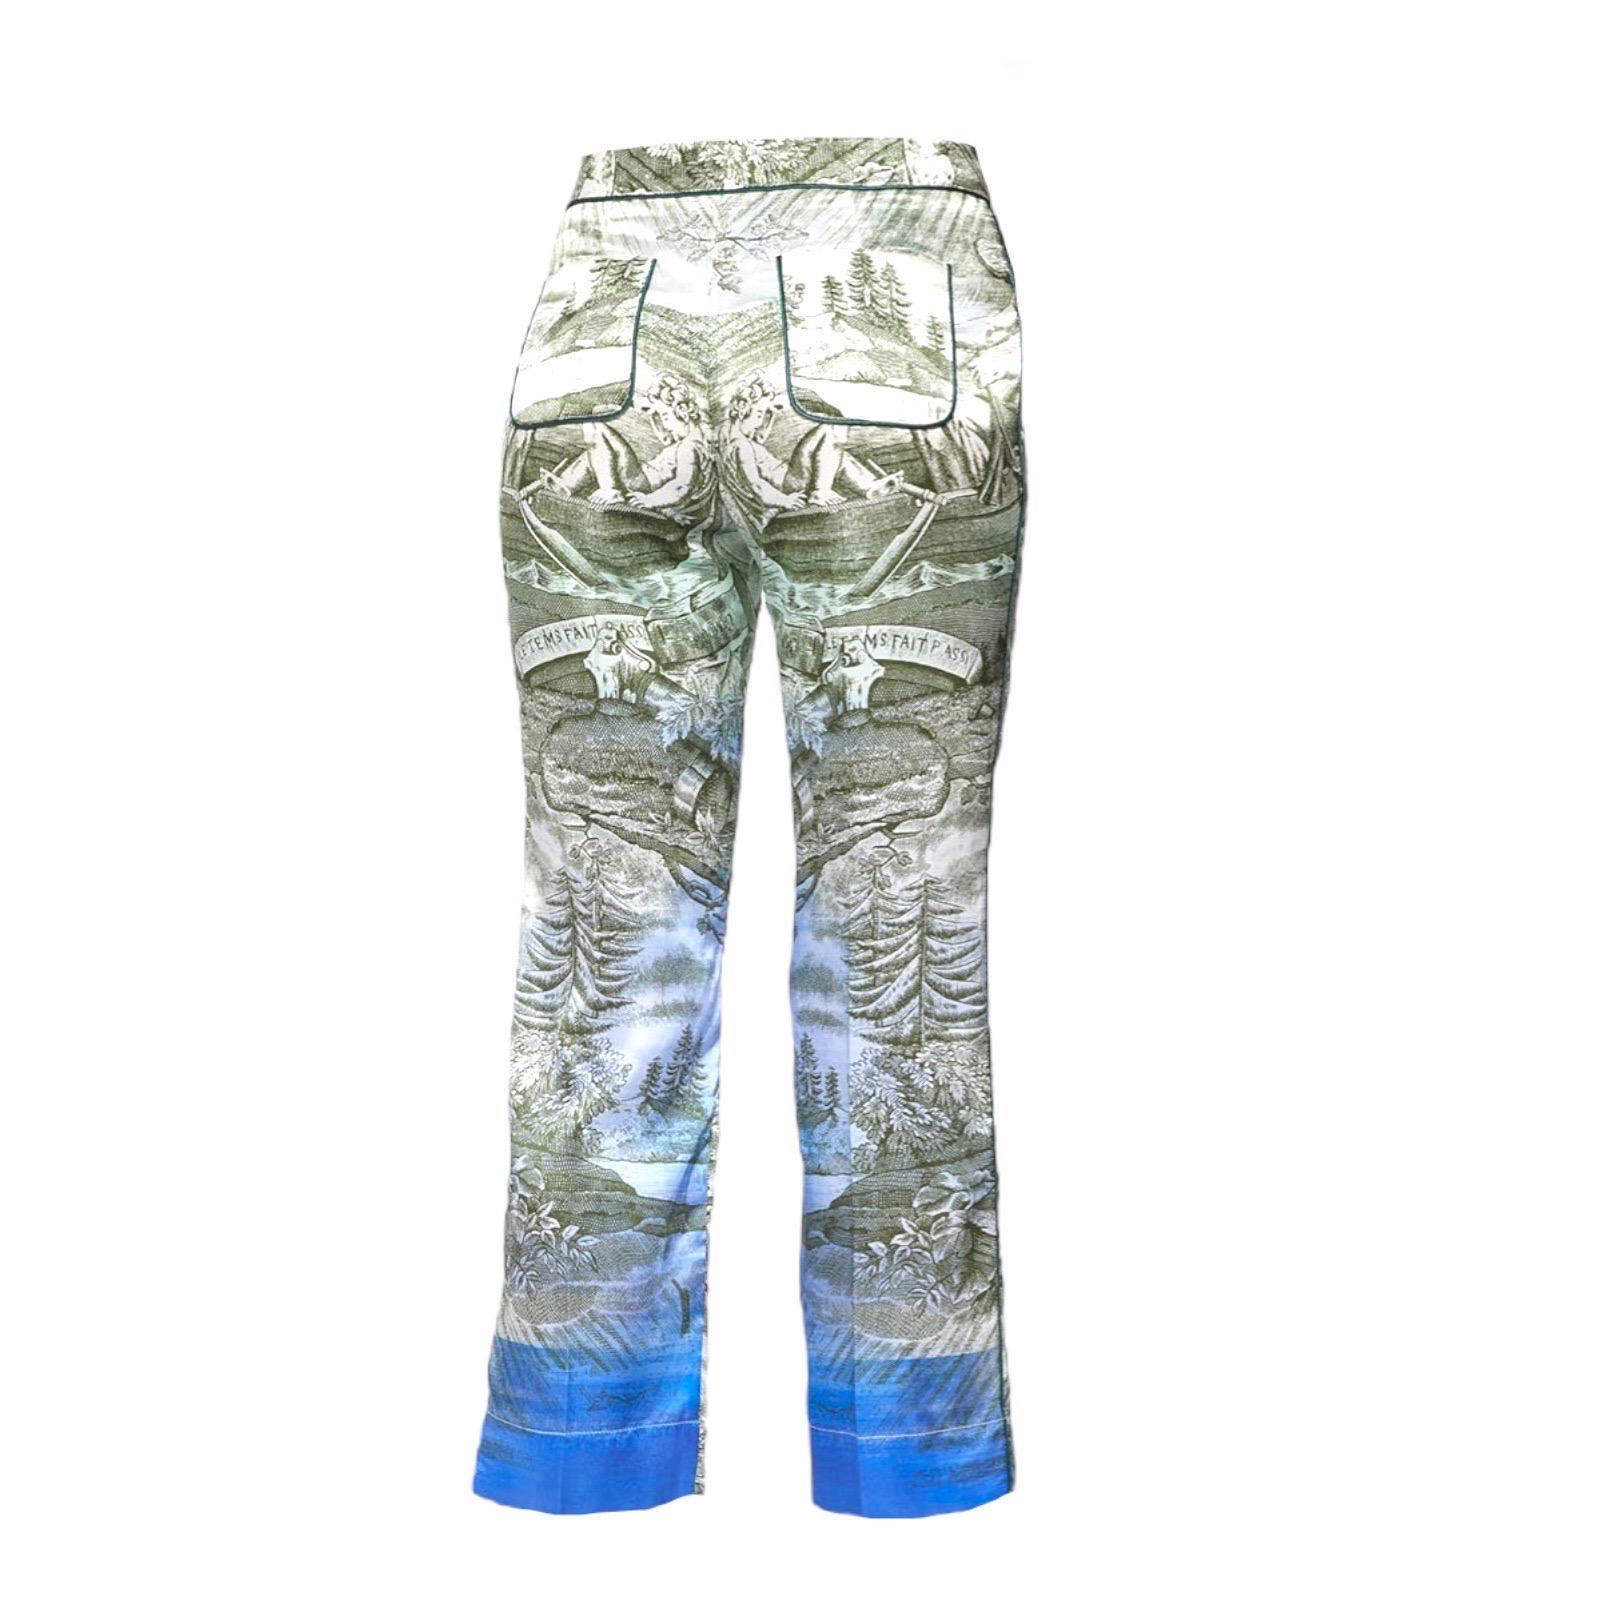 A stunning pair of silk pants designed by FOR RESTLESS SLEEPERS FRS.

The F.R.S For Restless Sleepers pants are a sumptuous alternative to tailored bottoms. They're crafted from finest silk blend and feature an amazing FRS print.

Dry clean